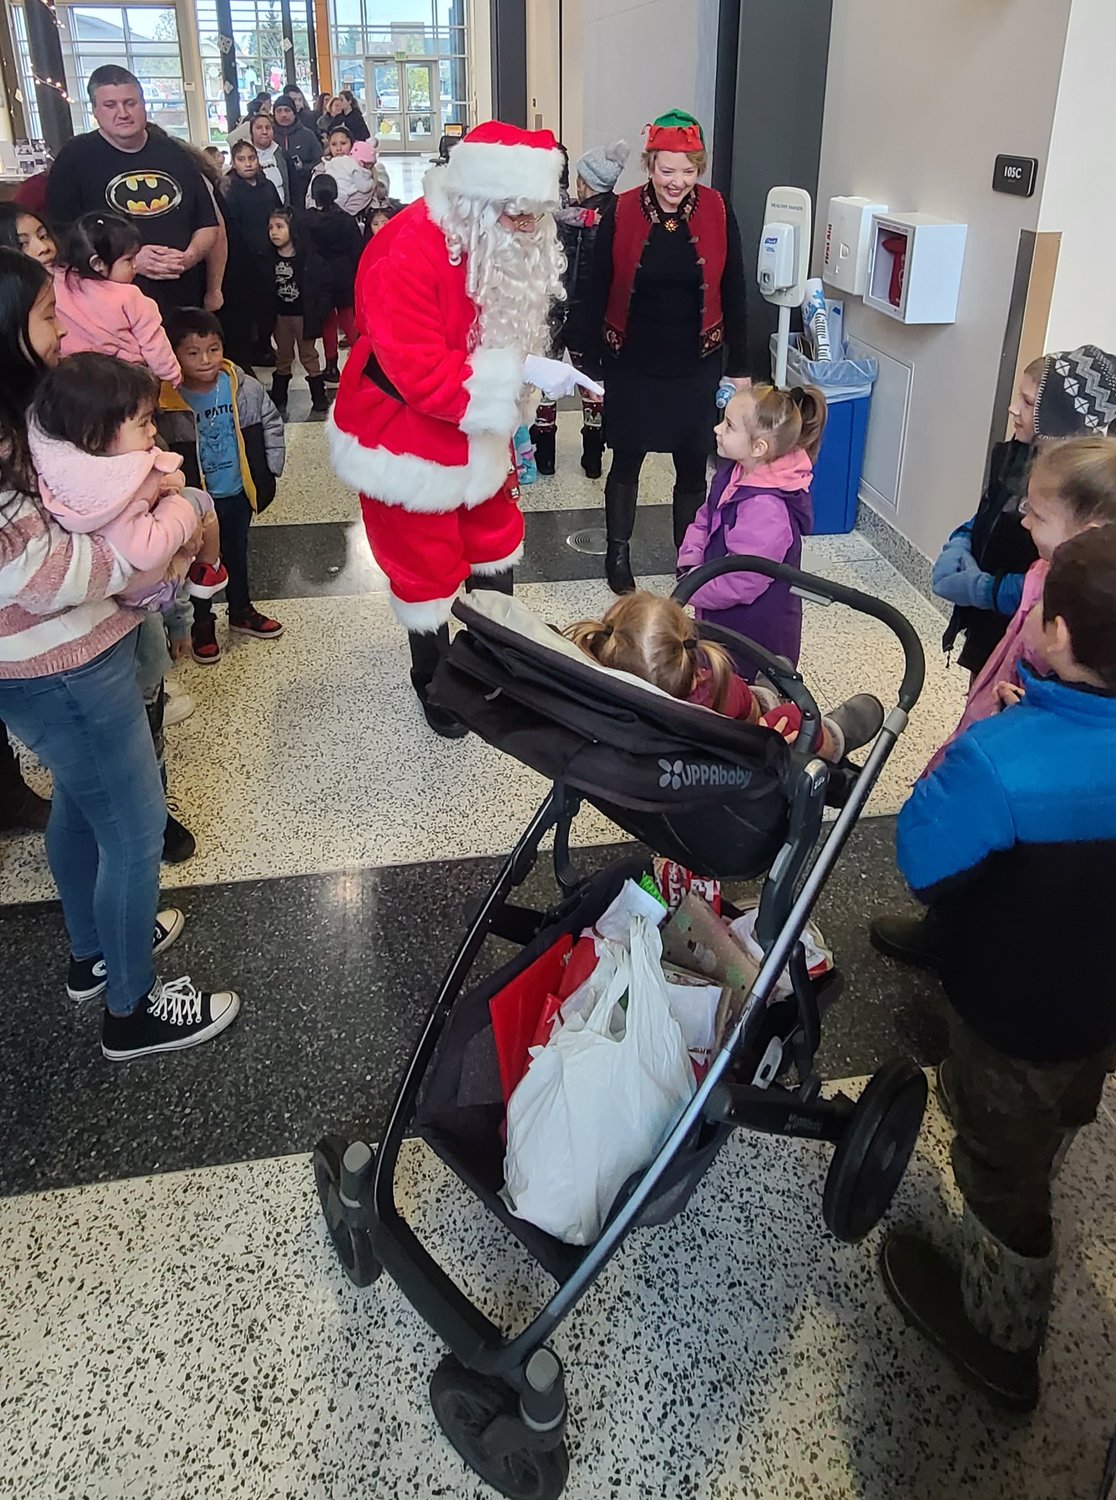 On Saturday at Centralia College, United Way of Lewis County hosted 270 kids for a gift giveaway, with each receiving a new toy and book from Santa Claus.  